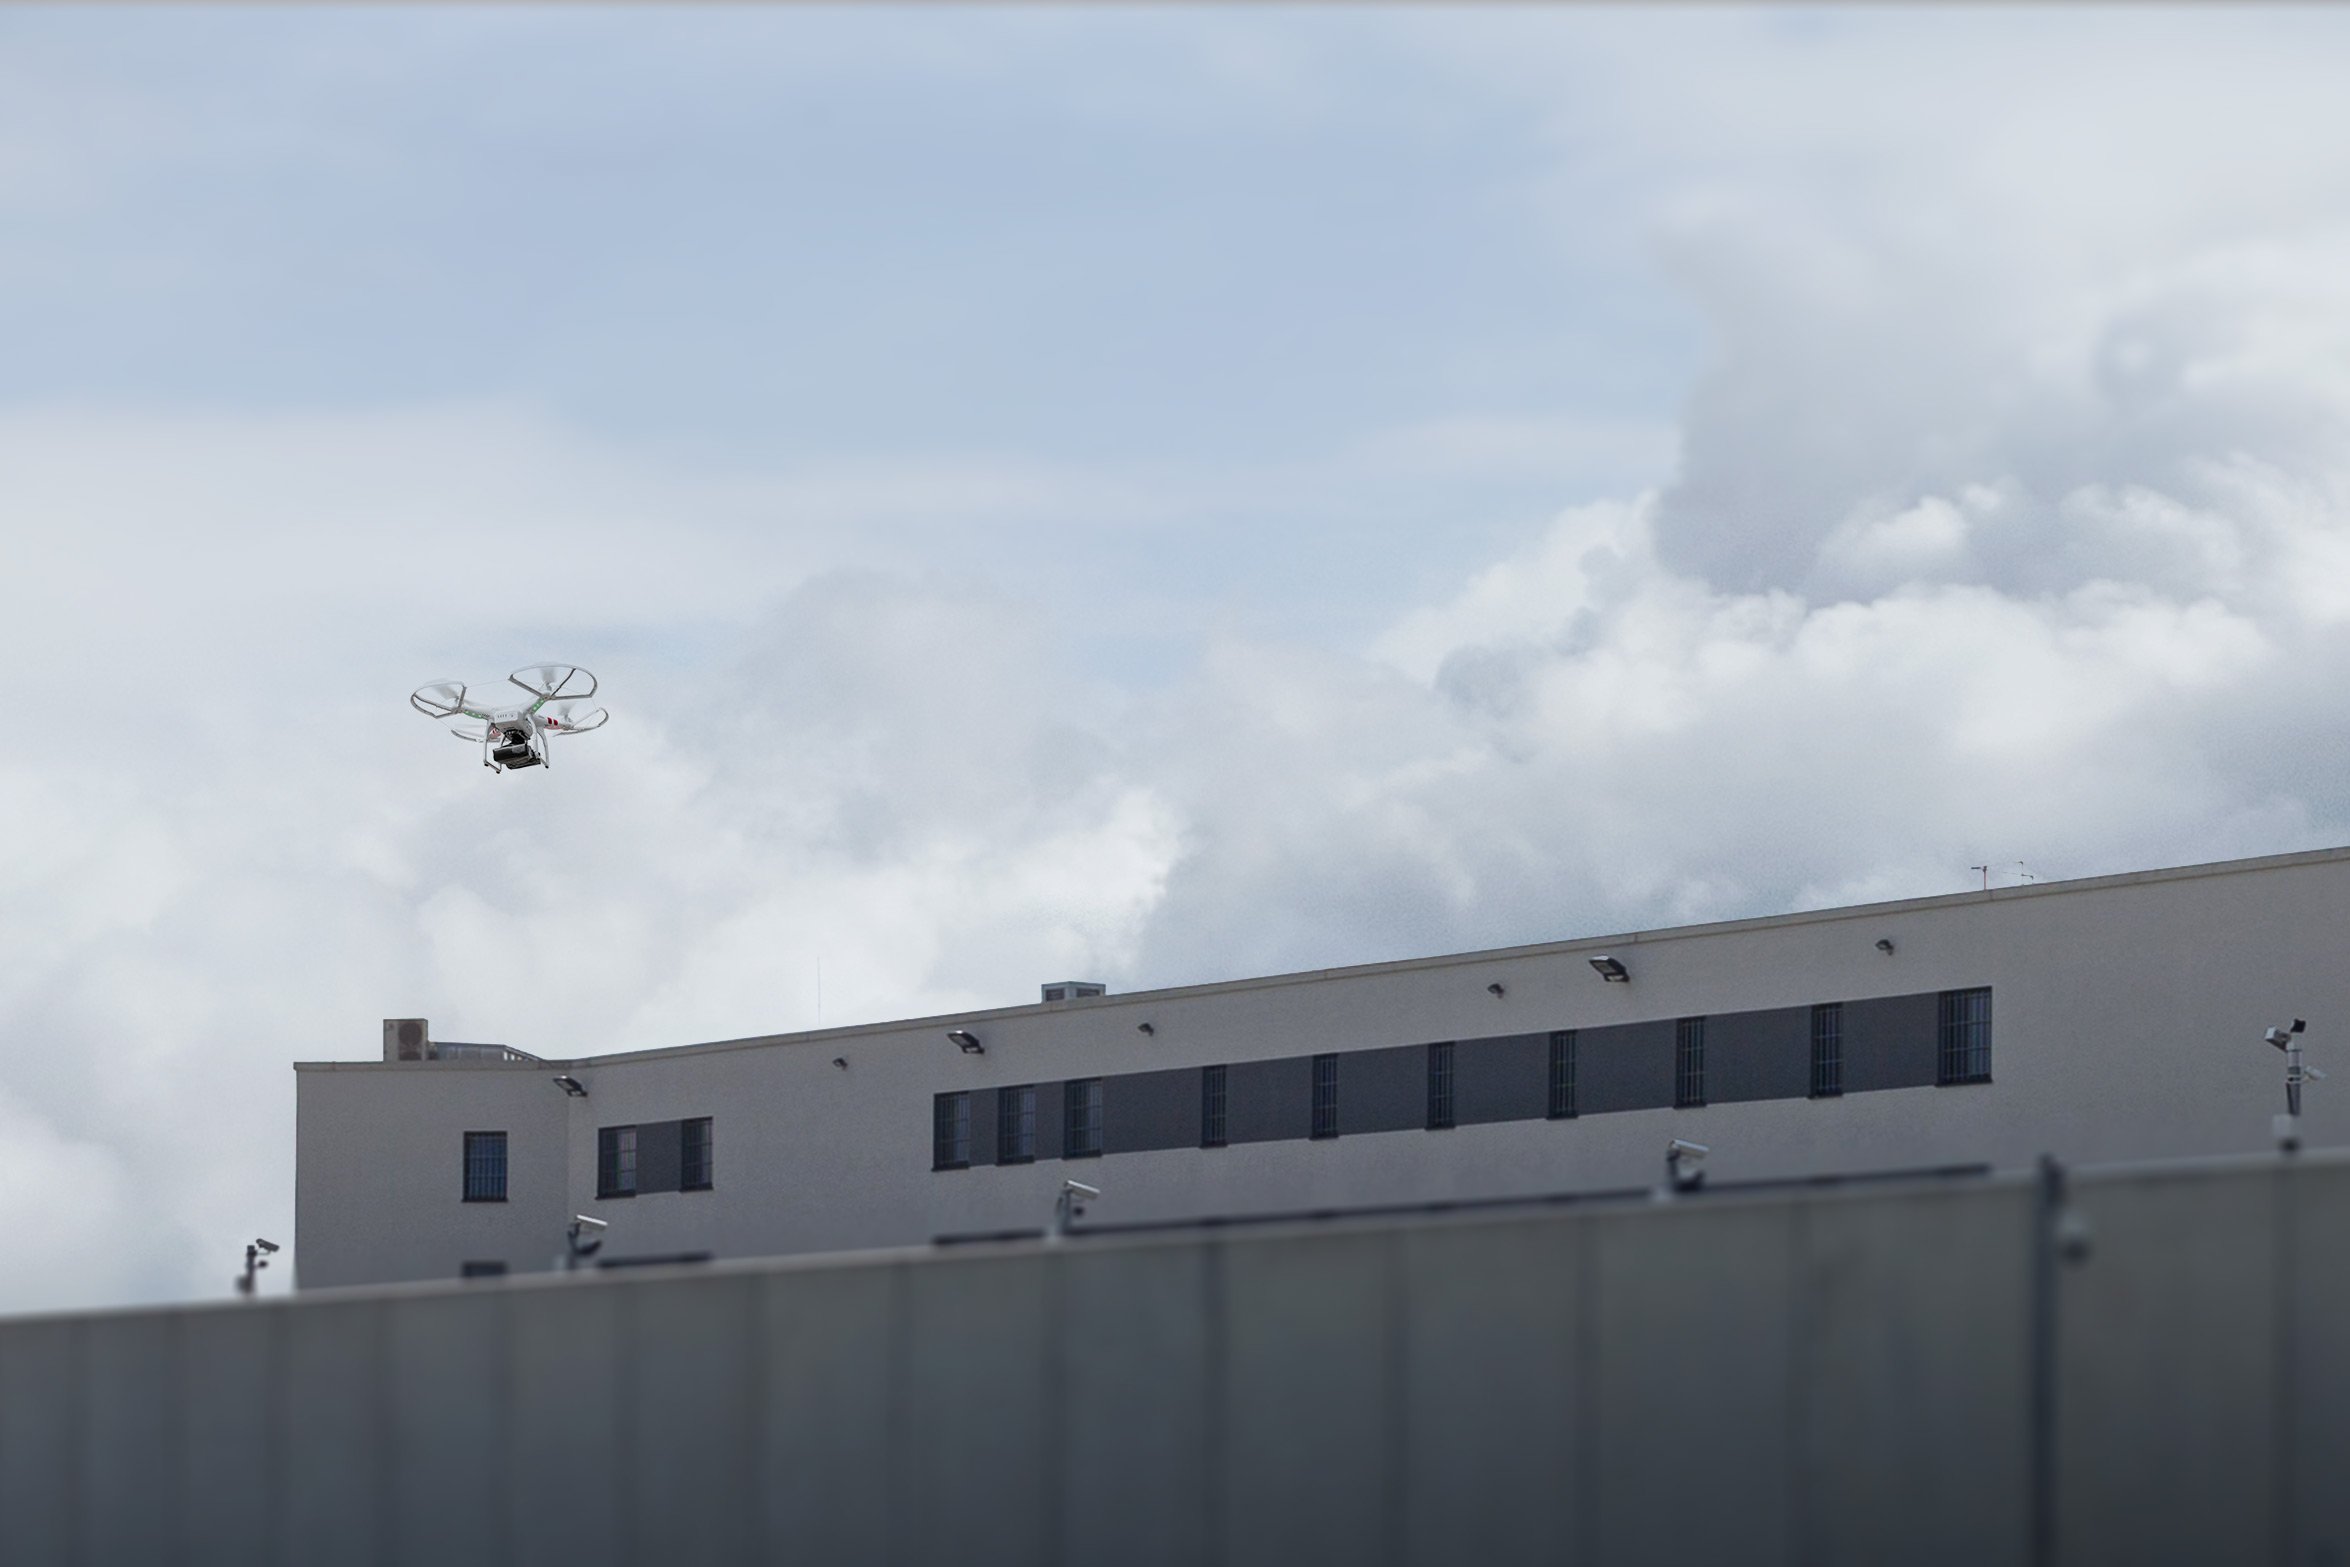 Stopping Unauthorized Drones at Correctional Facilities